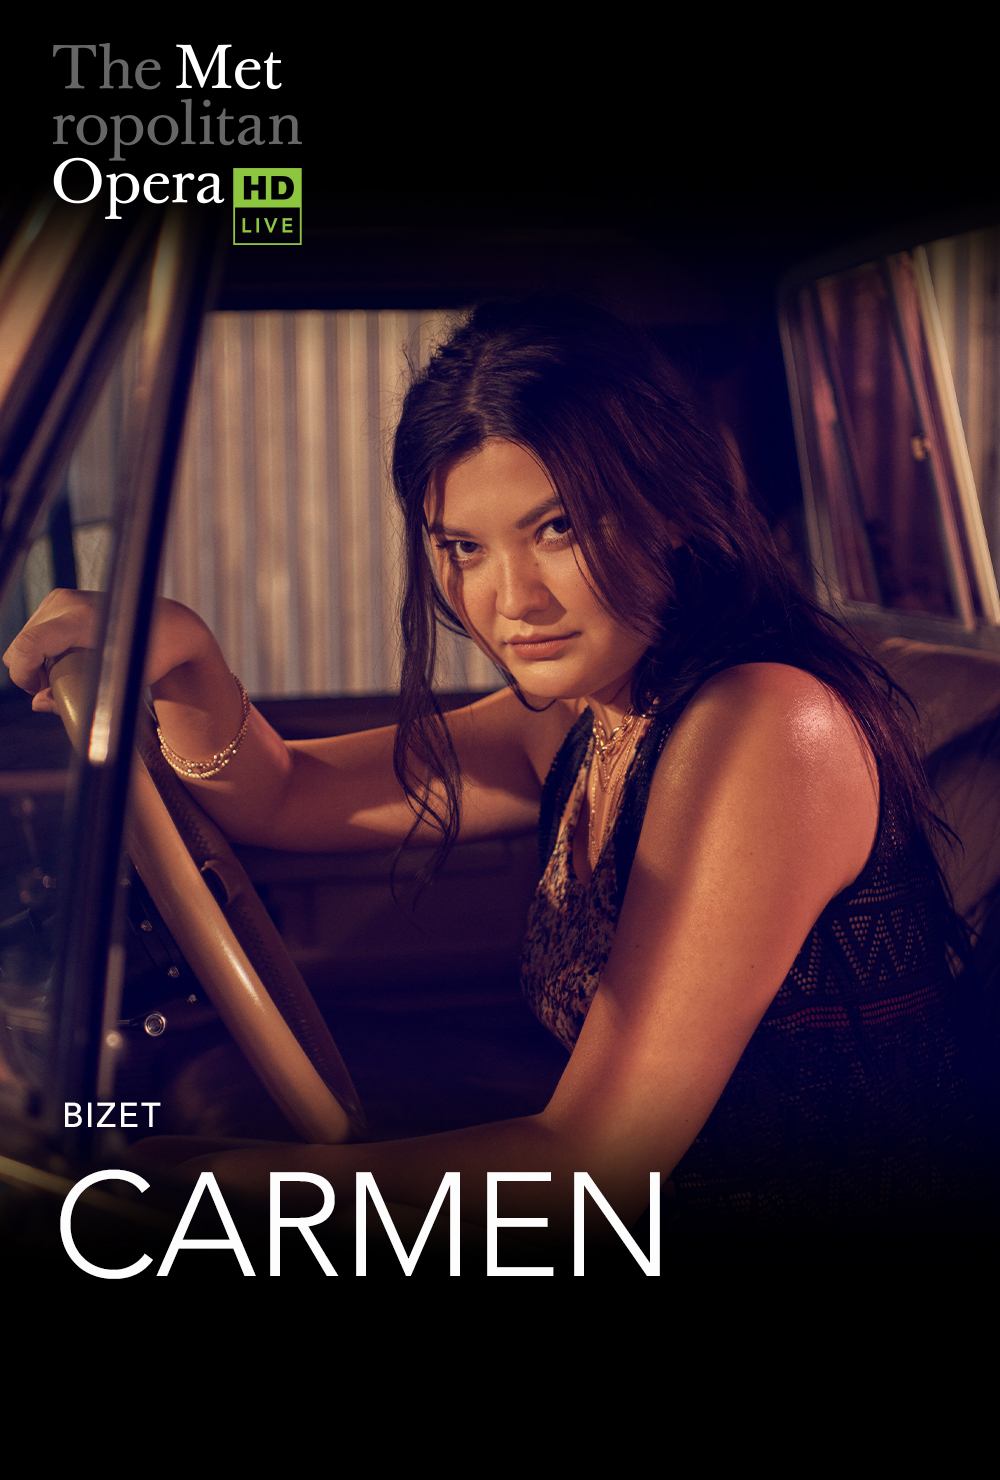 The Met: Live in HD 2023–24 season continues with  a daring new production of Bizet’s Carmen  on Saturday, January 27, at 12:55PM ET, presented by Fathom Events